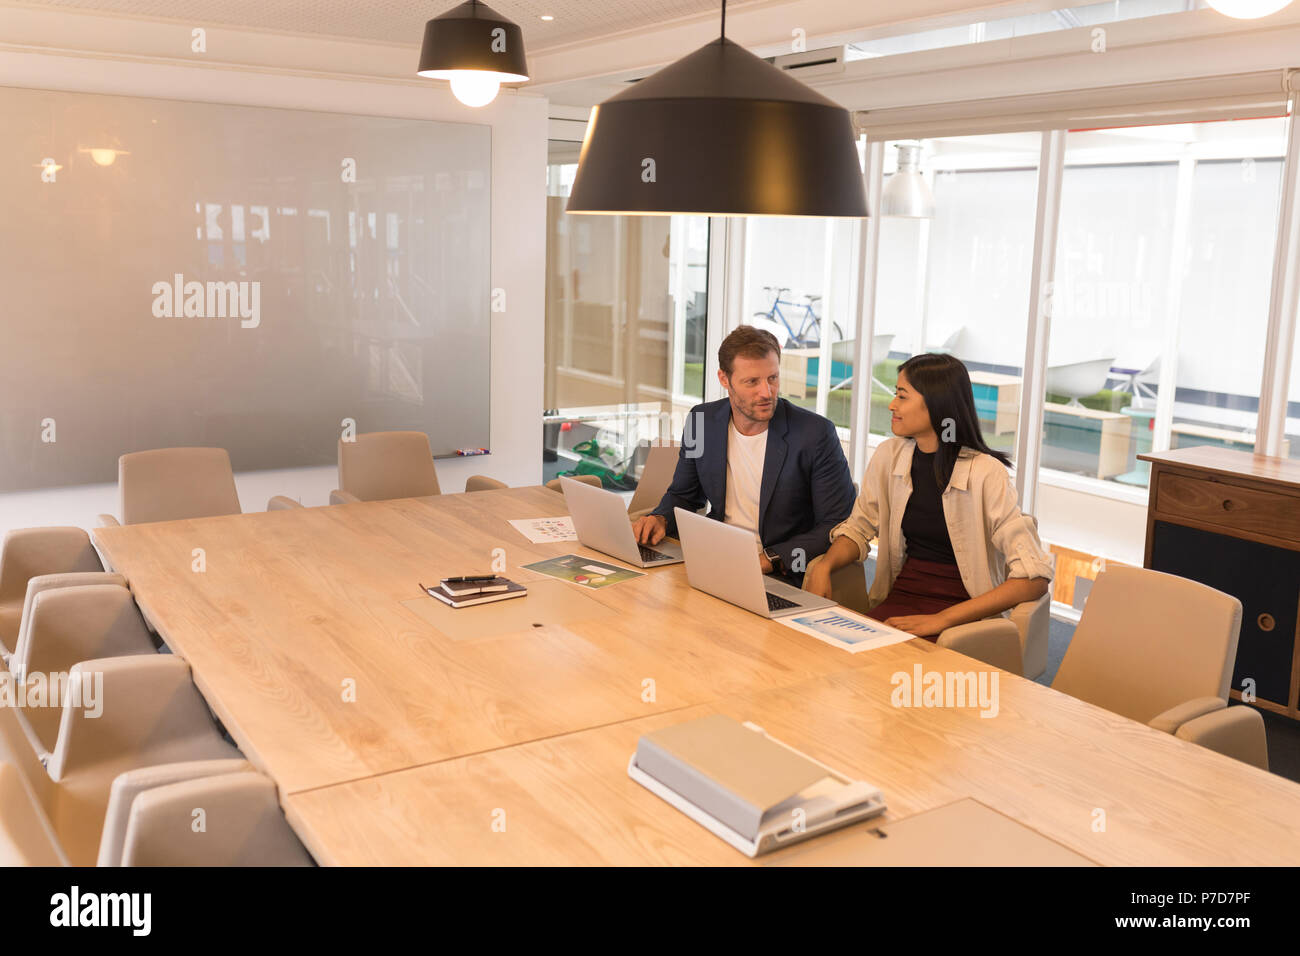 Business colleagues interacting with each other in conference room Stock Photo